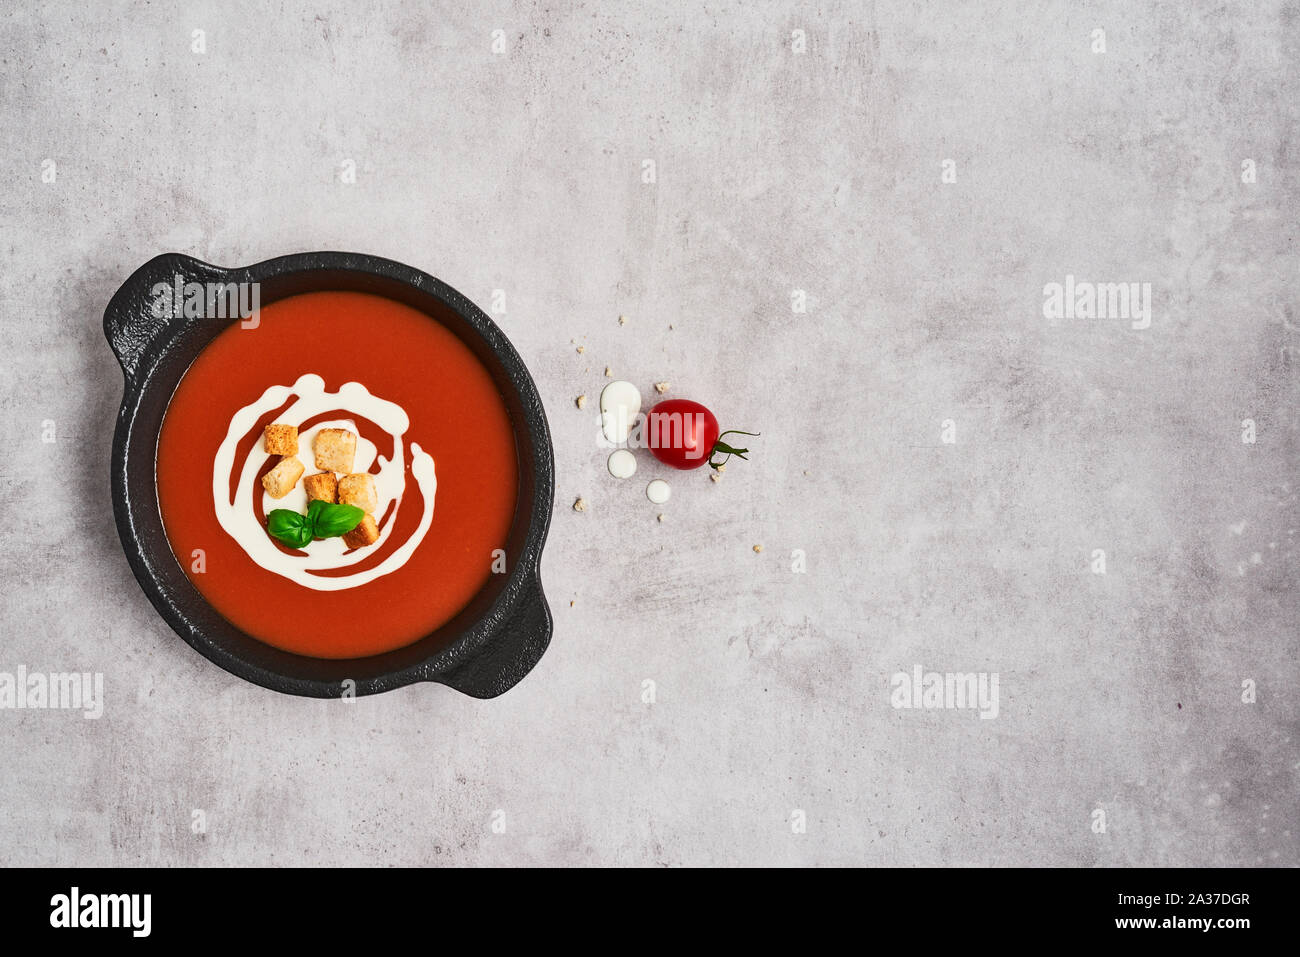 Tomato soup with cream, croutons and basil in a black bowl on stone background. Top view. Copy space for text. Stock Photo